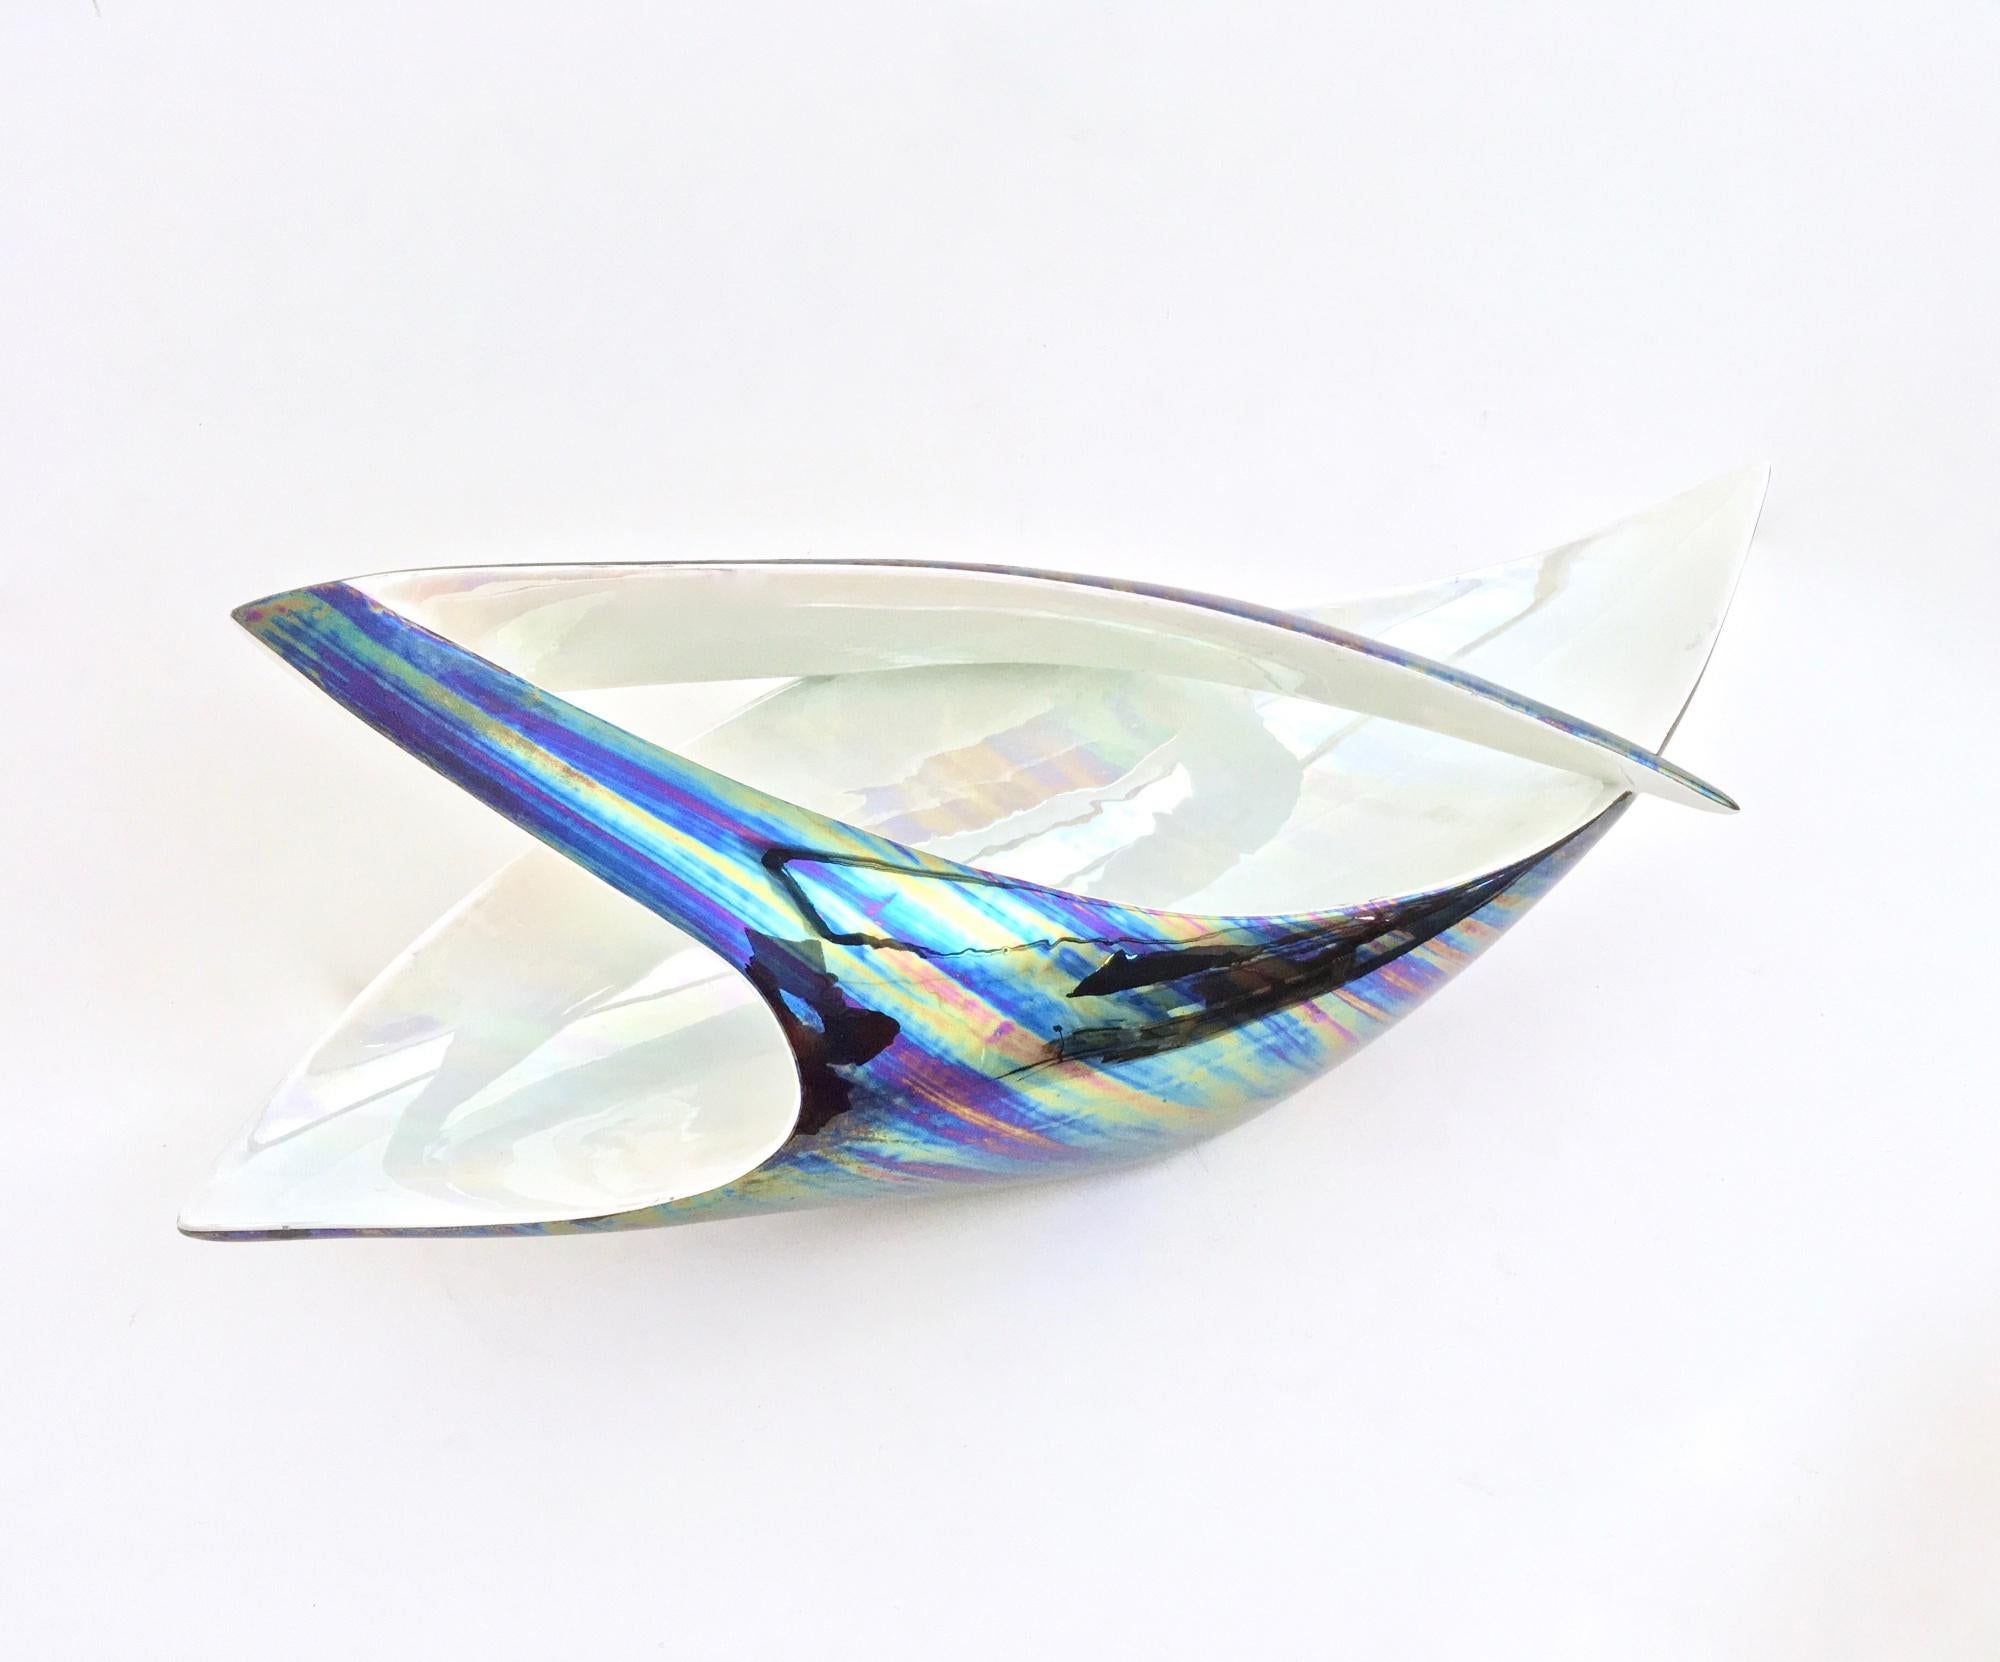 Made in Italy, 1950s.
This sinuous, dynamic and elegant centerpiece is made in lacquered ceramic that is varnished with iridescent colors.
It is a vintage piece, therefore it might show slight traces of use but it can be considered as in excellent